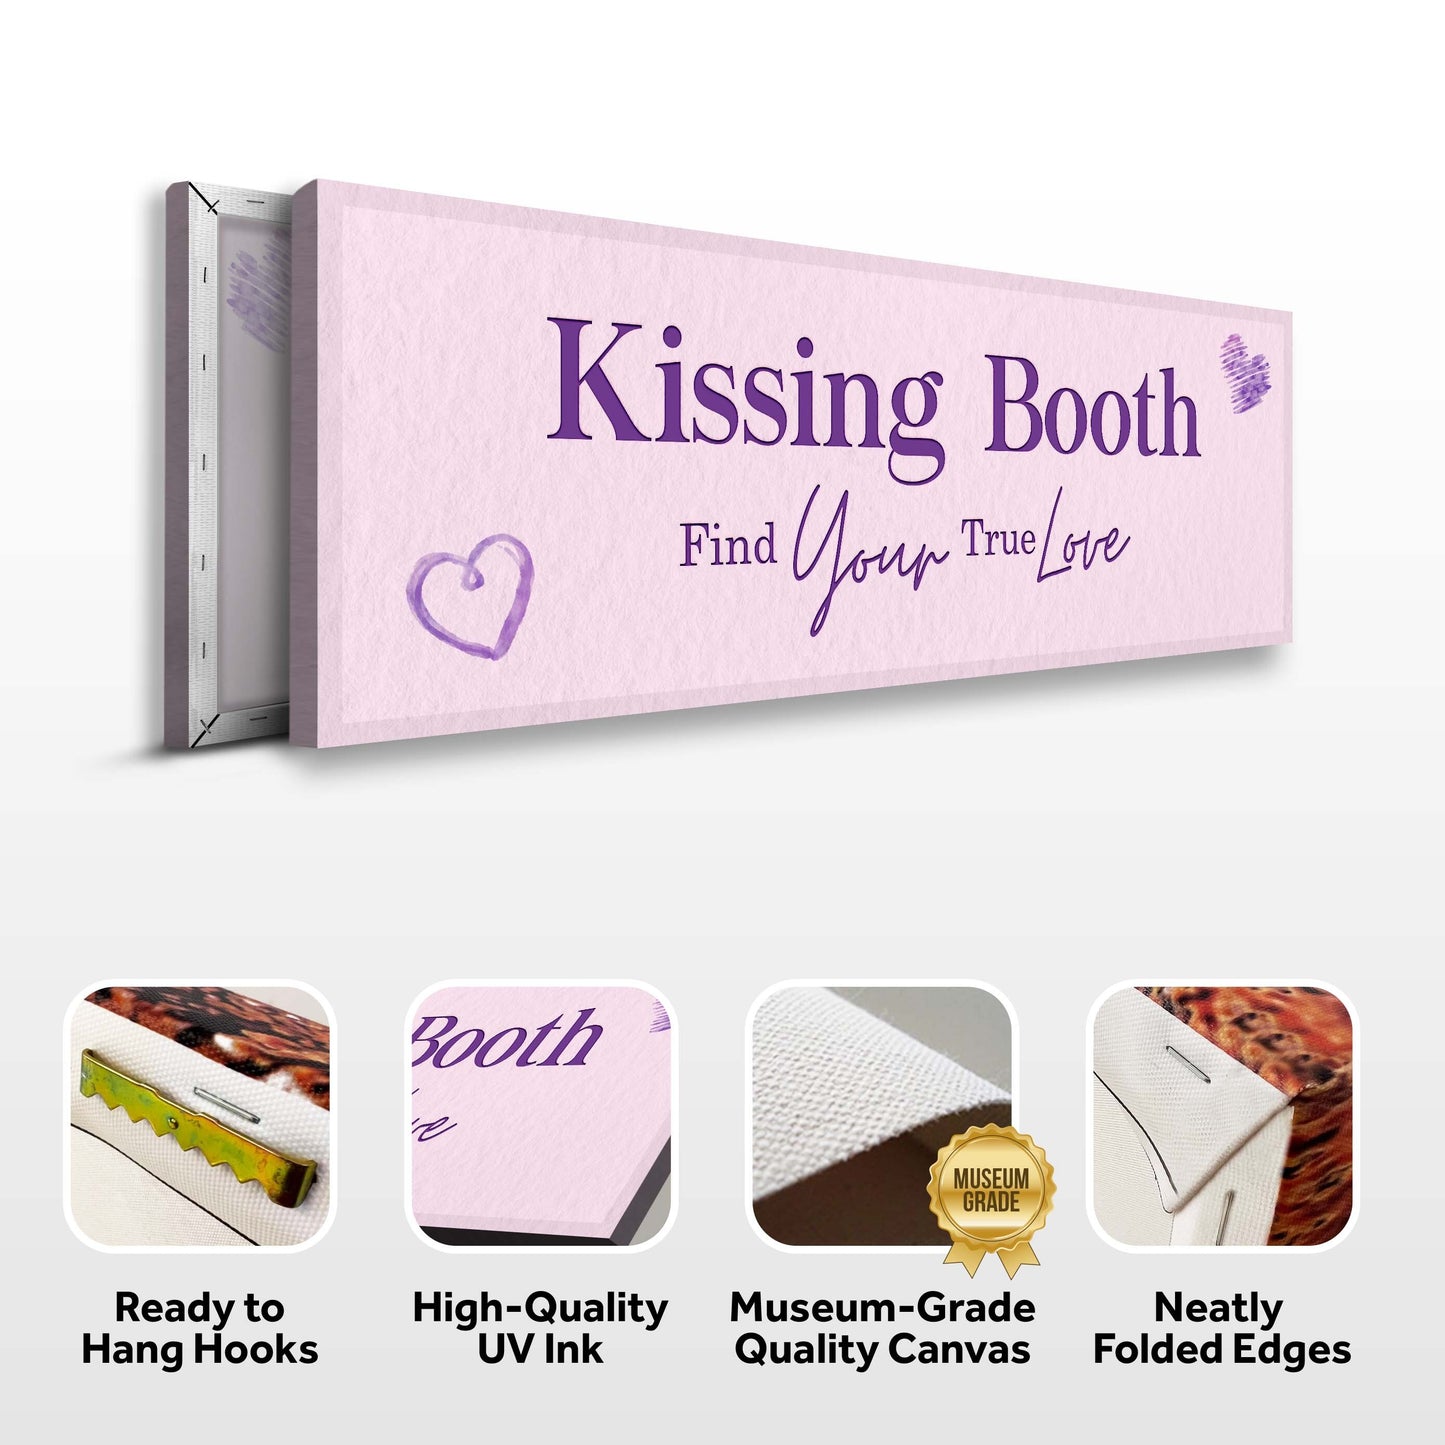 Kissing Booth Find Your True Love Sign